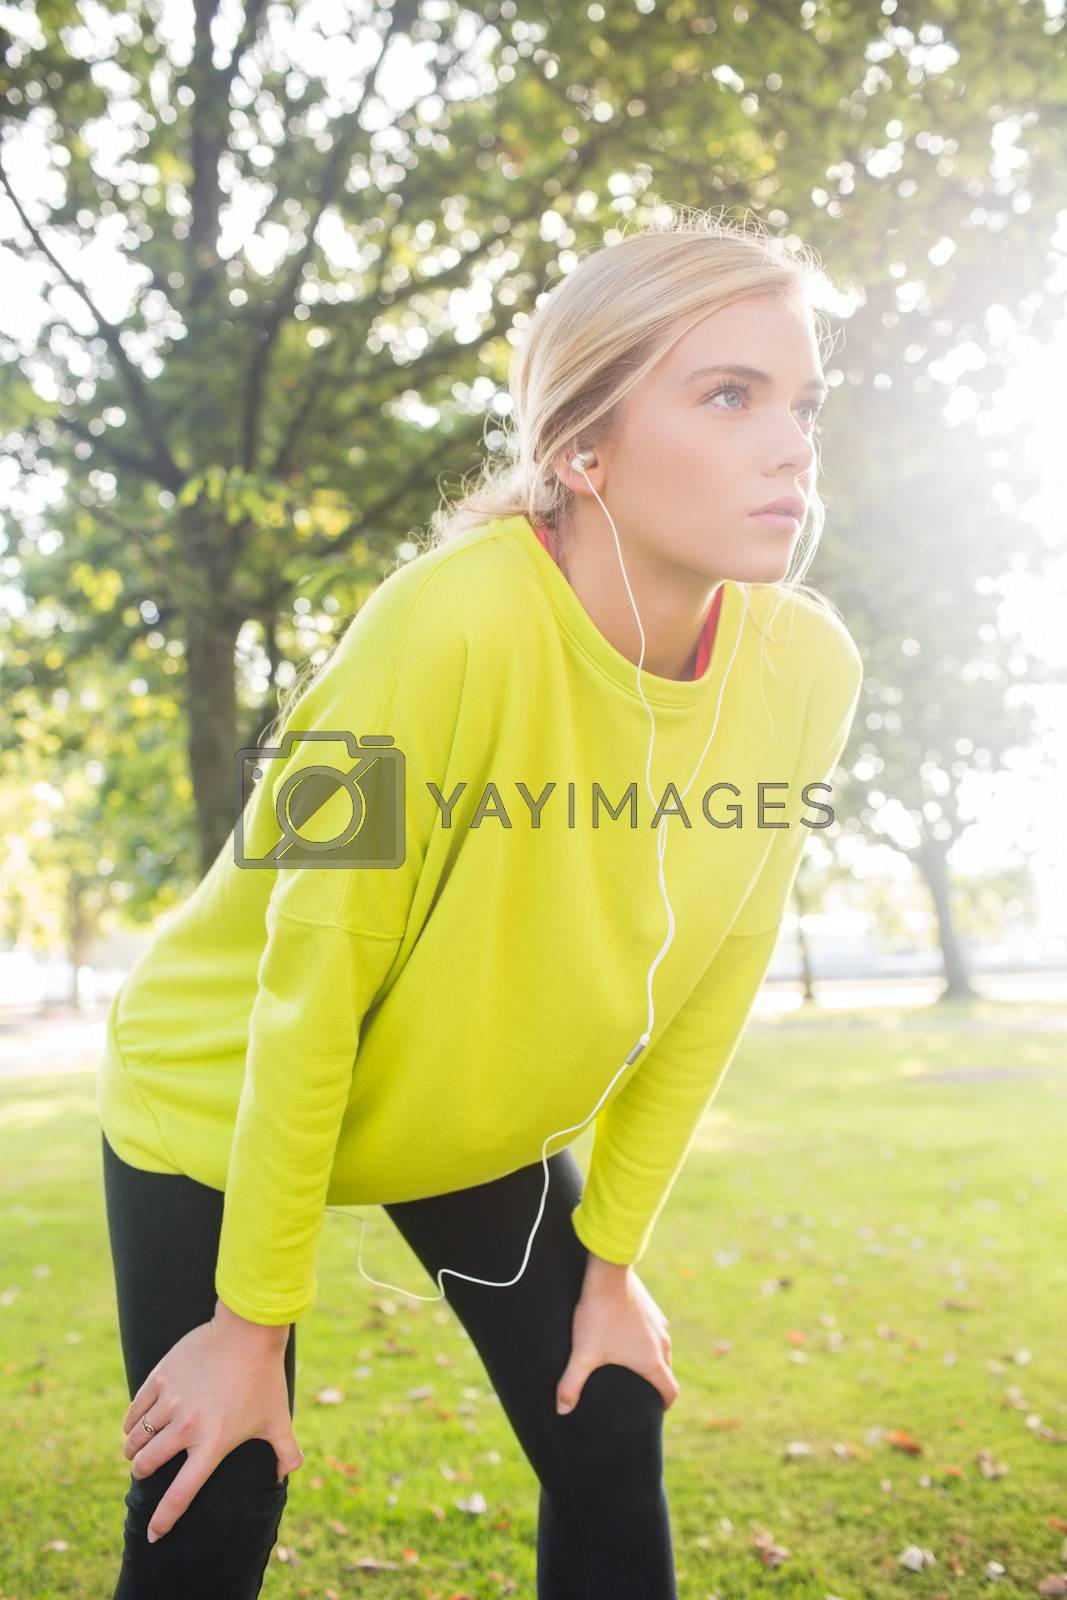 Royalty free image of Active serious blonde catching her breath by Wavebreakmedia